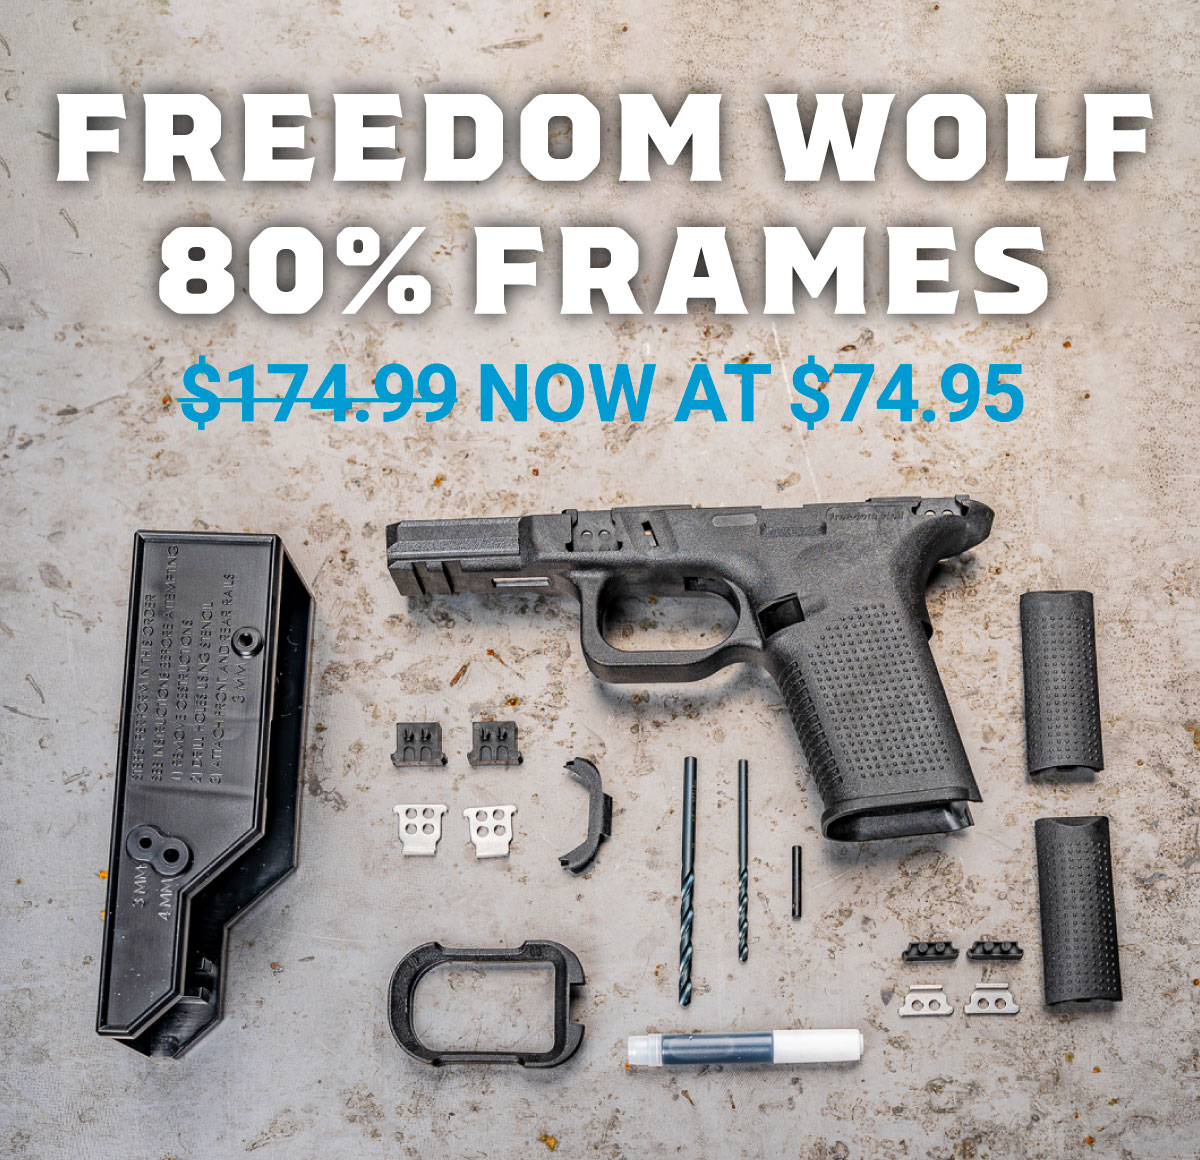 Freedom Wolf 80% Frames | 174.99 now at 74.95